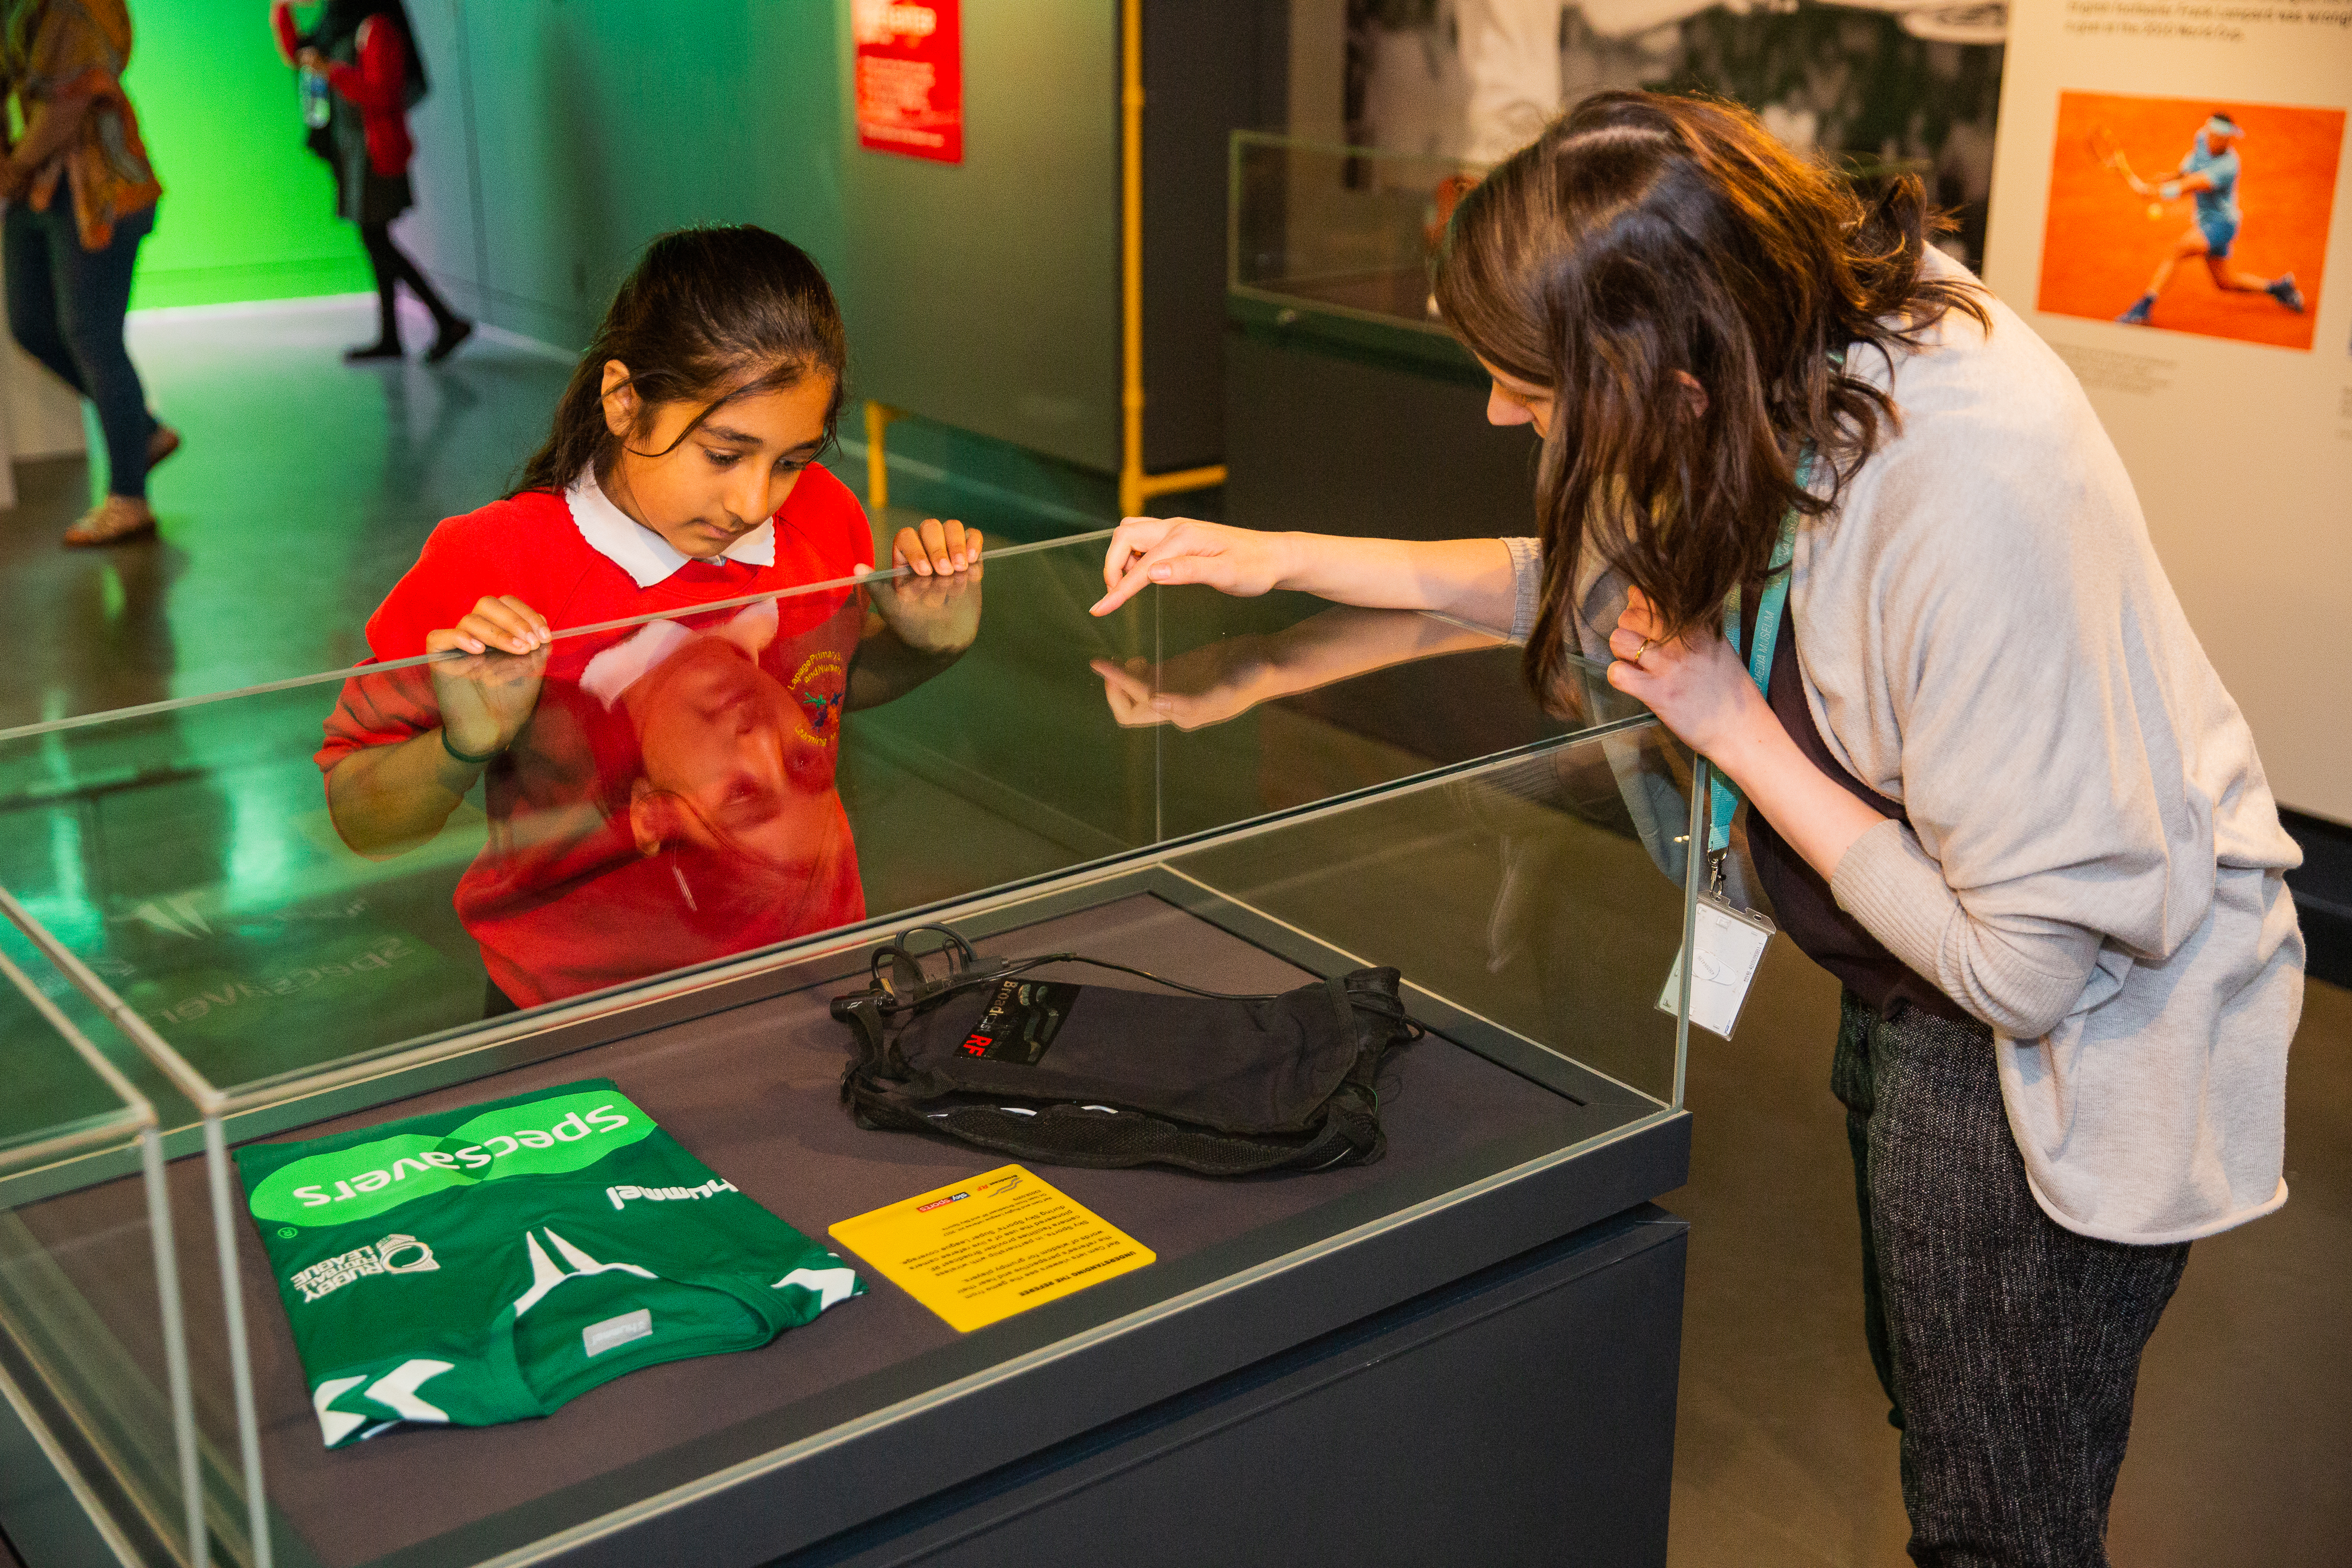 A student inspects objects displayed at the Action Replay exhibition